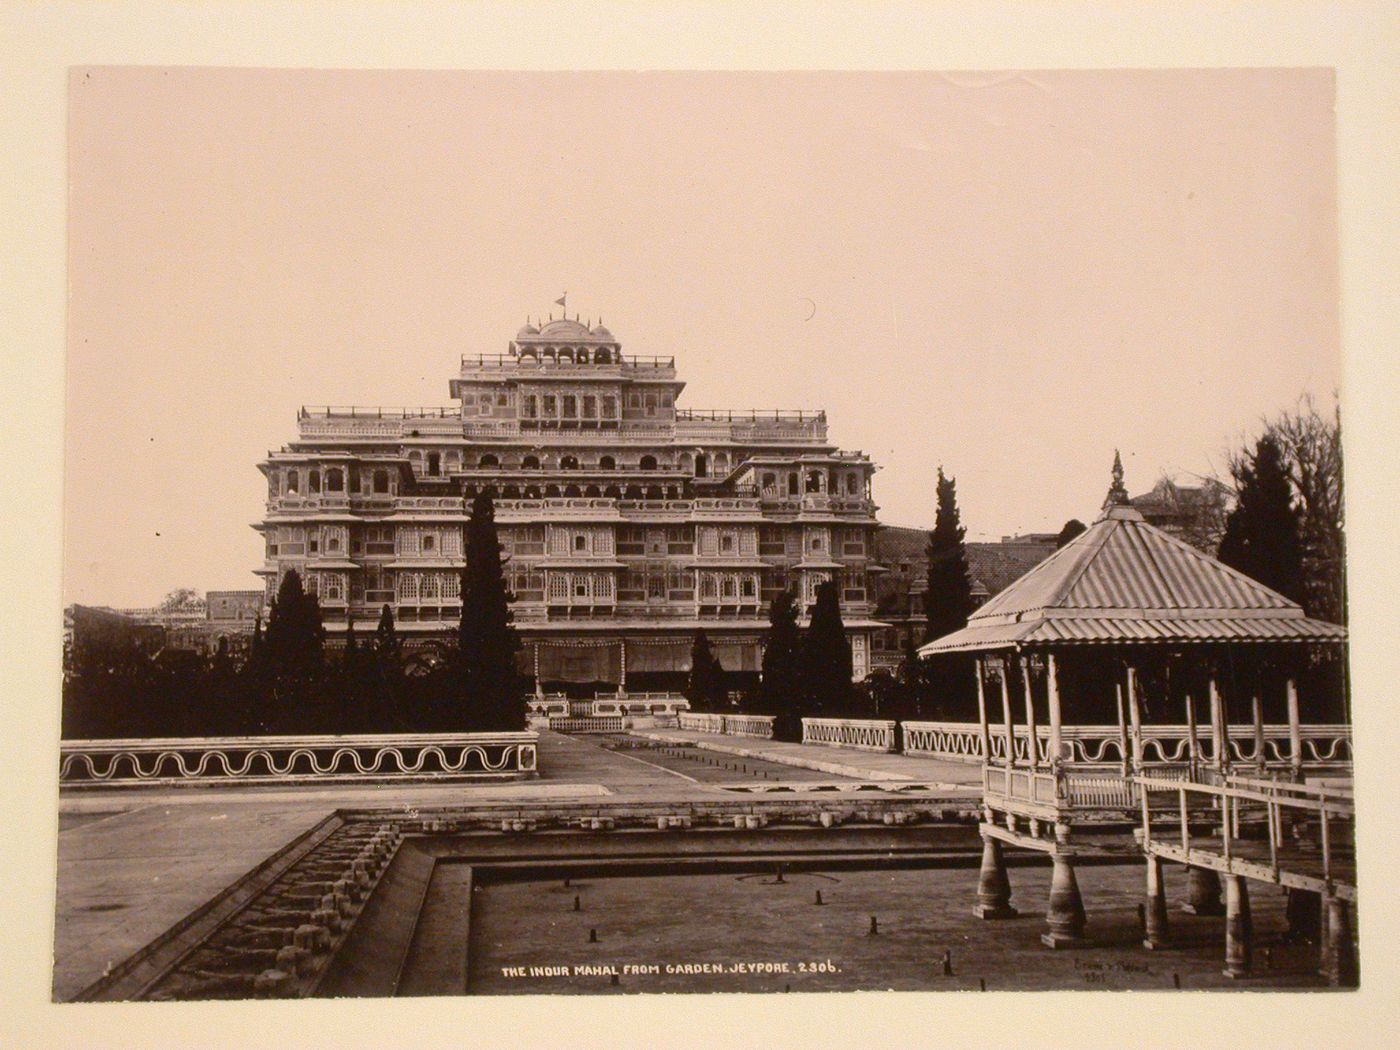 View of the Chandra Mahal [Moon Palace] from the Jai Niwas Garden, Jeypore (now Jaipur), India